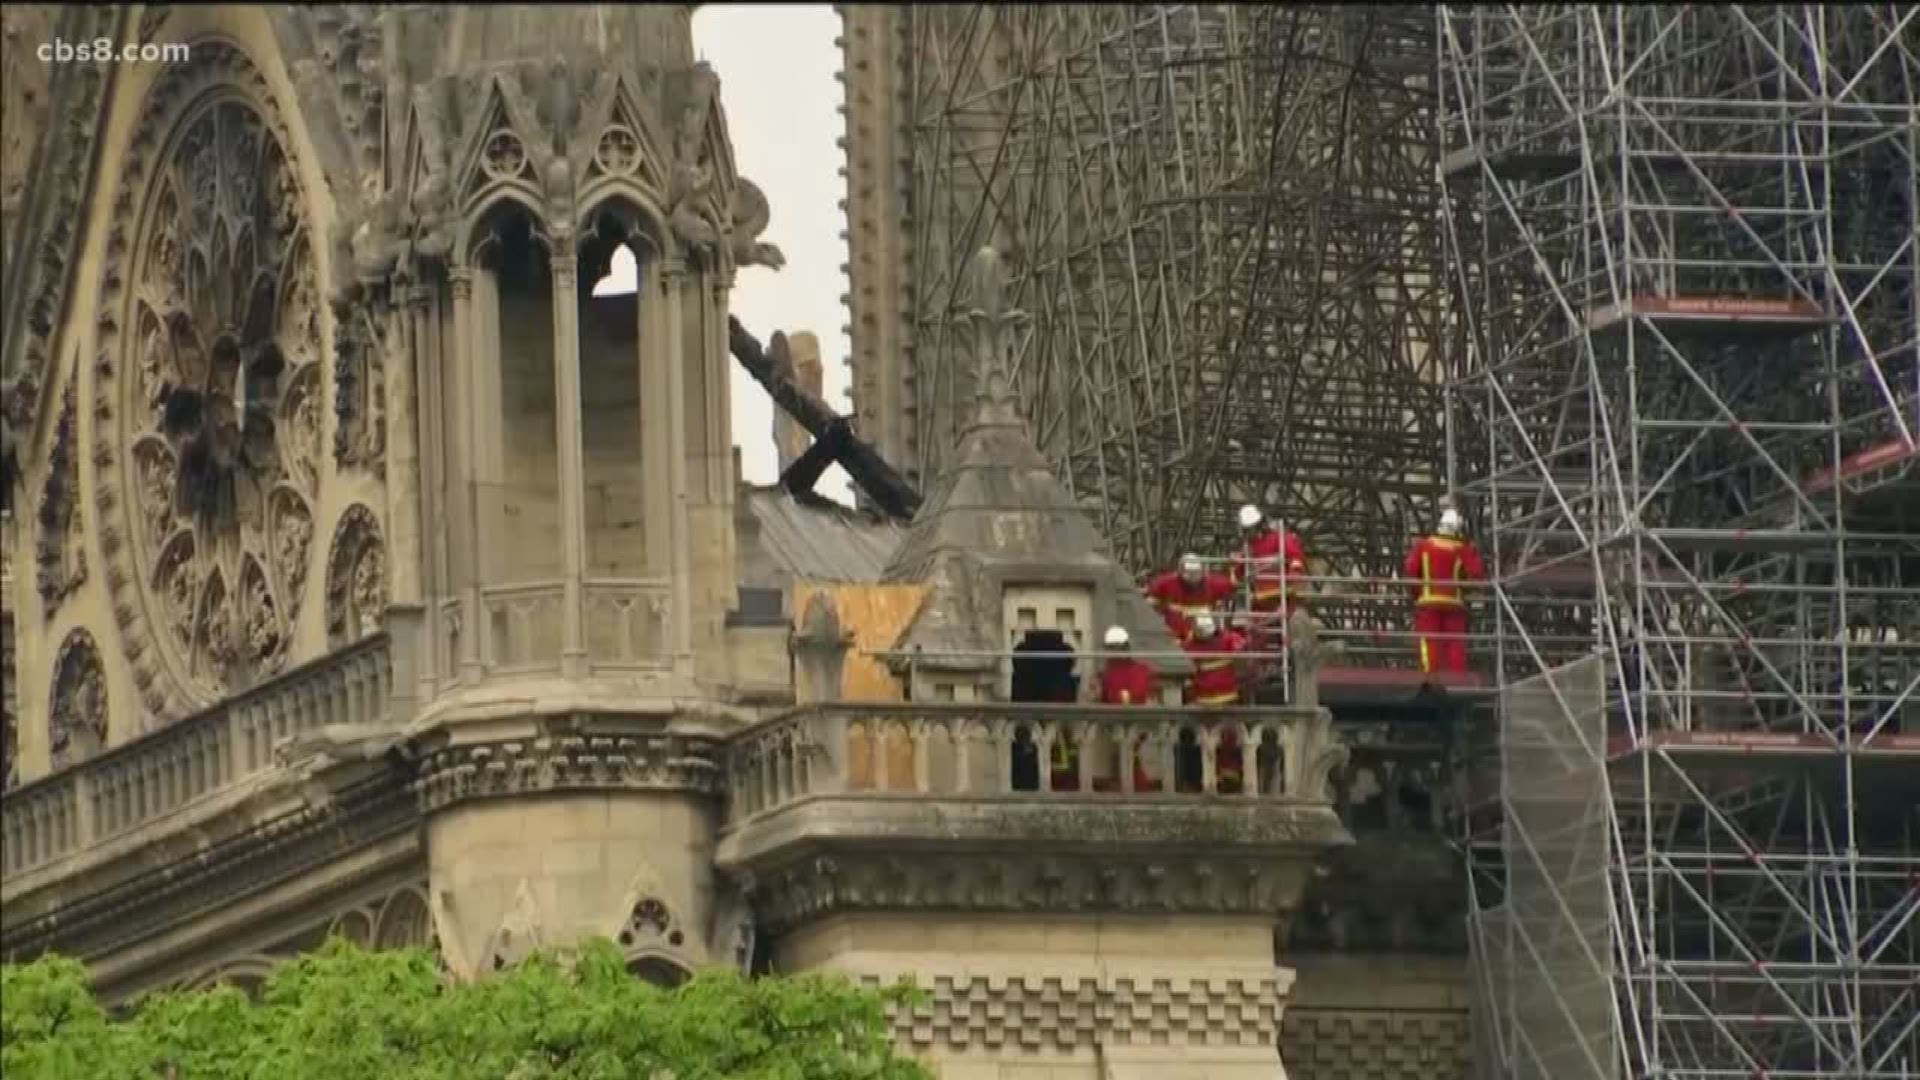 On Saturday, thousands of yellow vest protesters took to the streets in France arguing that Notre Dame donation money should be used to help the poor.